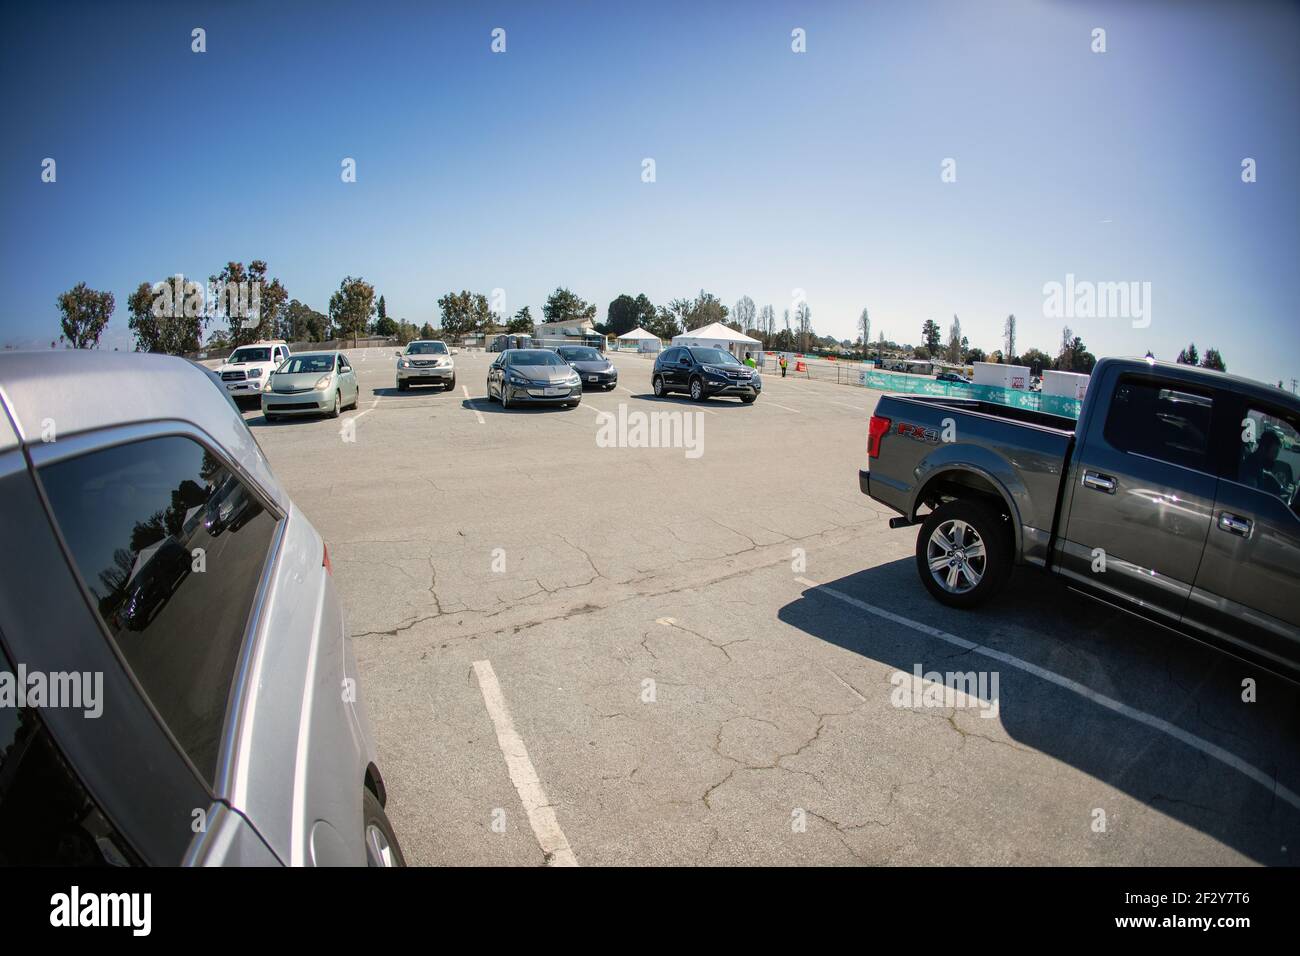 Vaccination recipients wait in their cars after a Covid-19 shot at a drive through vaccination site in Santa Cruz, California.  March 2021 Stock Photo